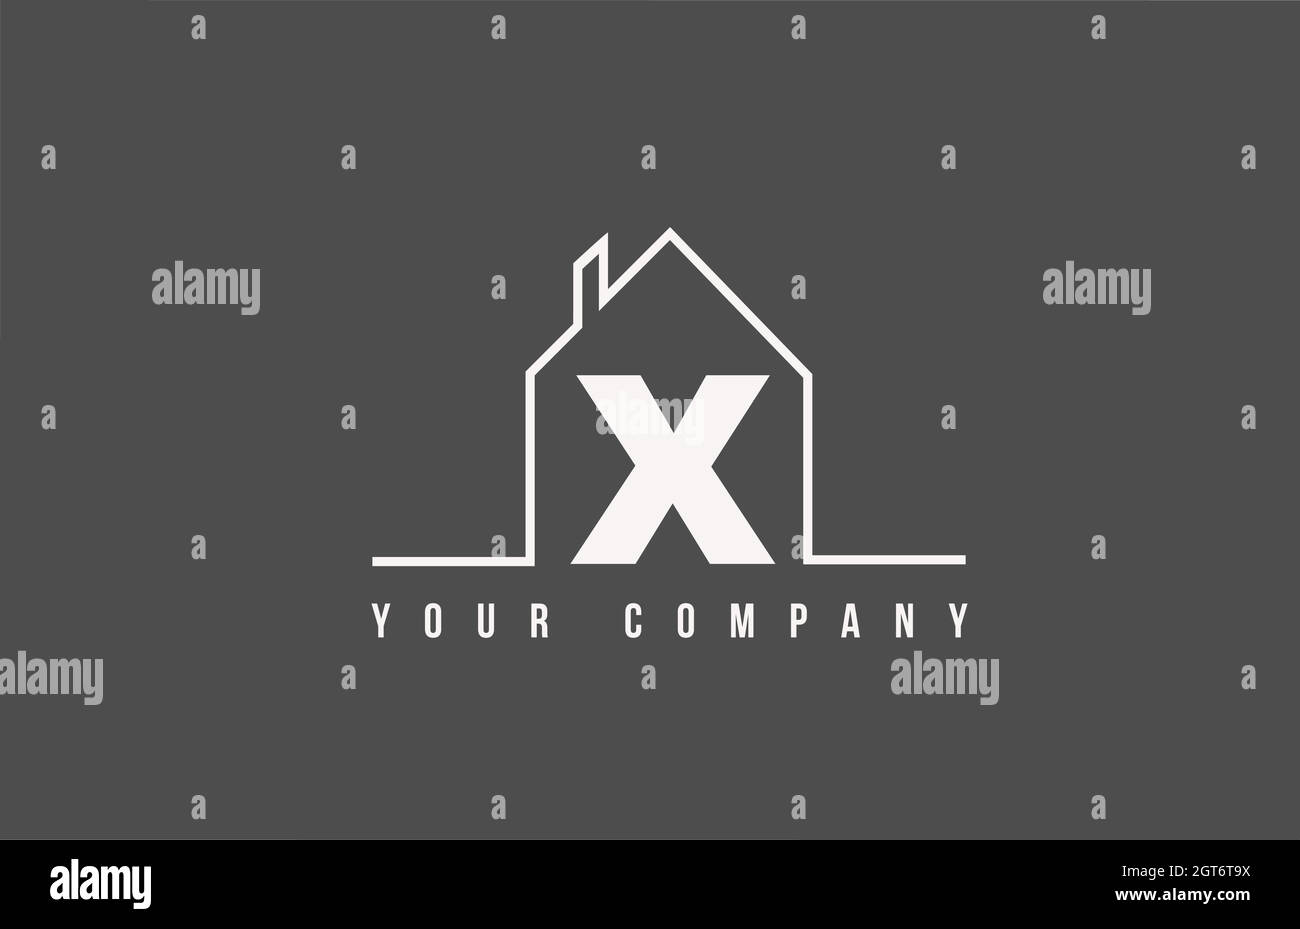 X alphabet letter icon logo of a home. Real estate house design for company and business identity with line Stock Vector